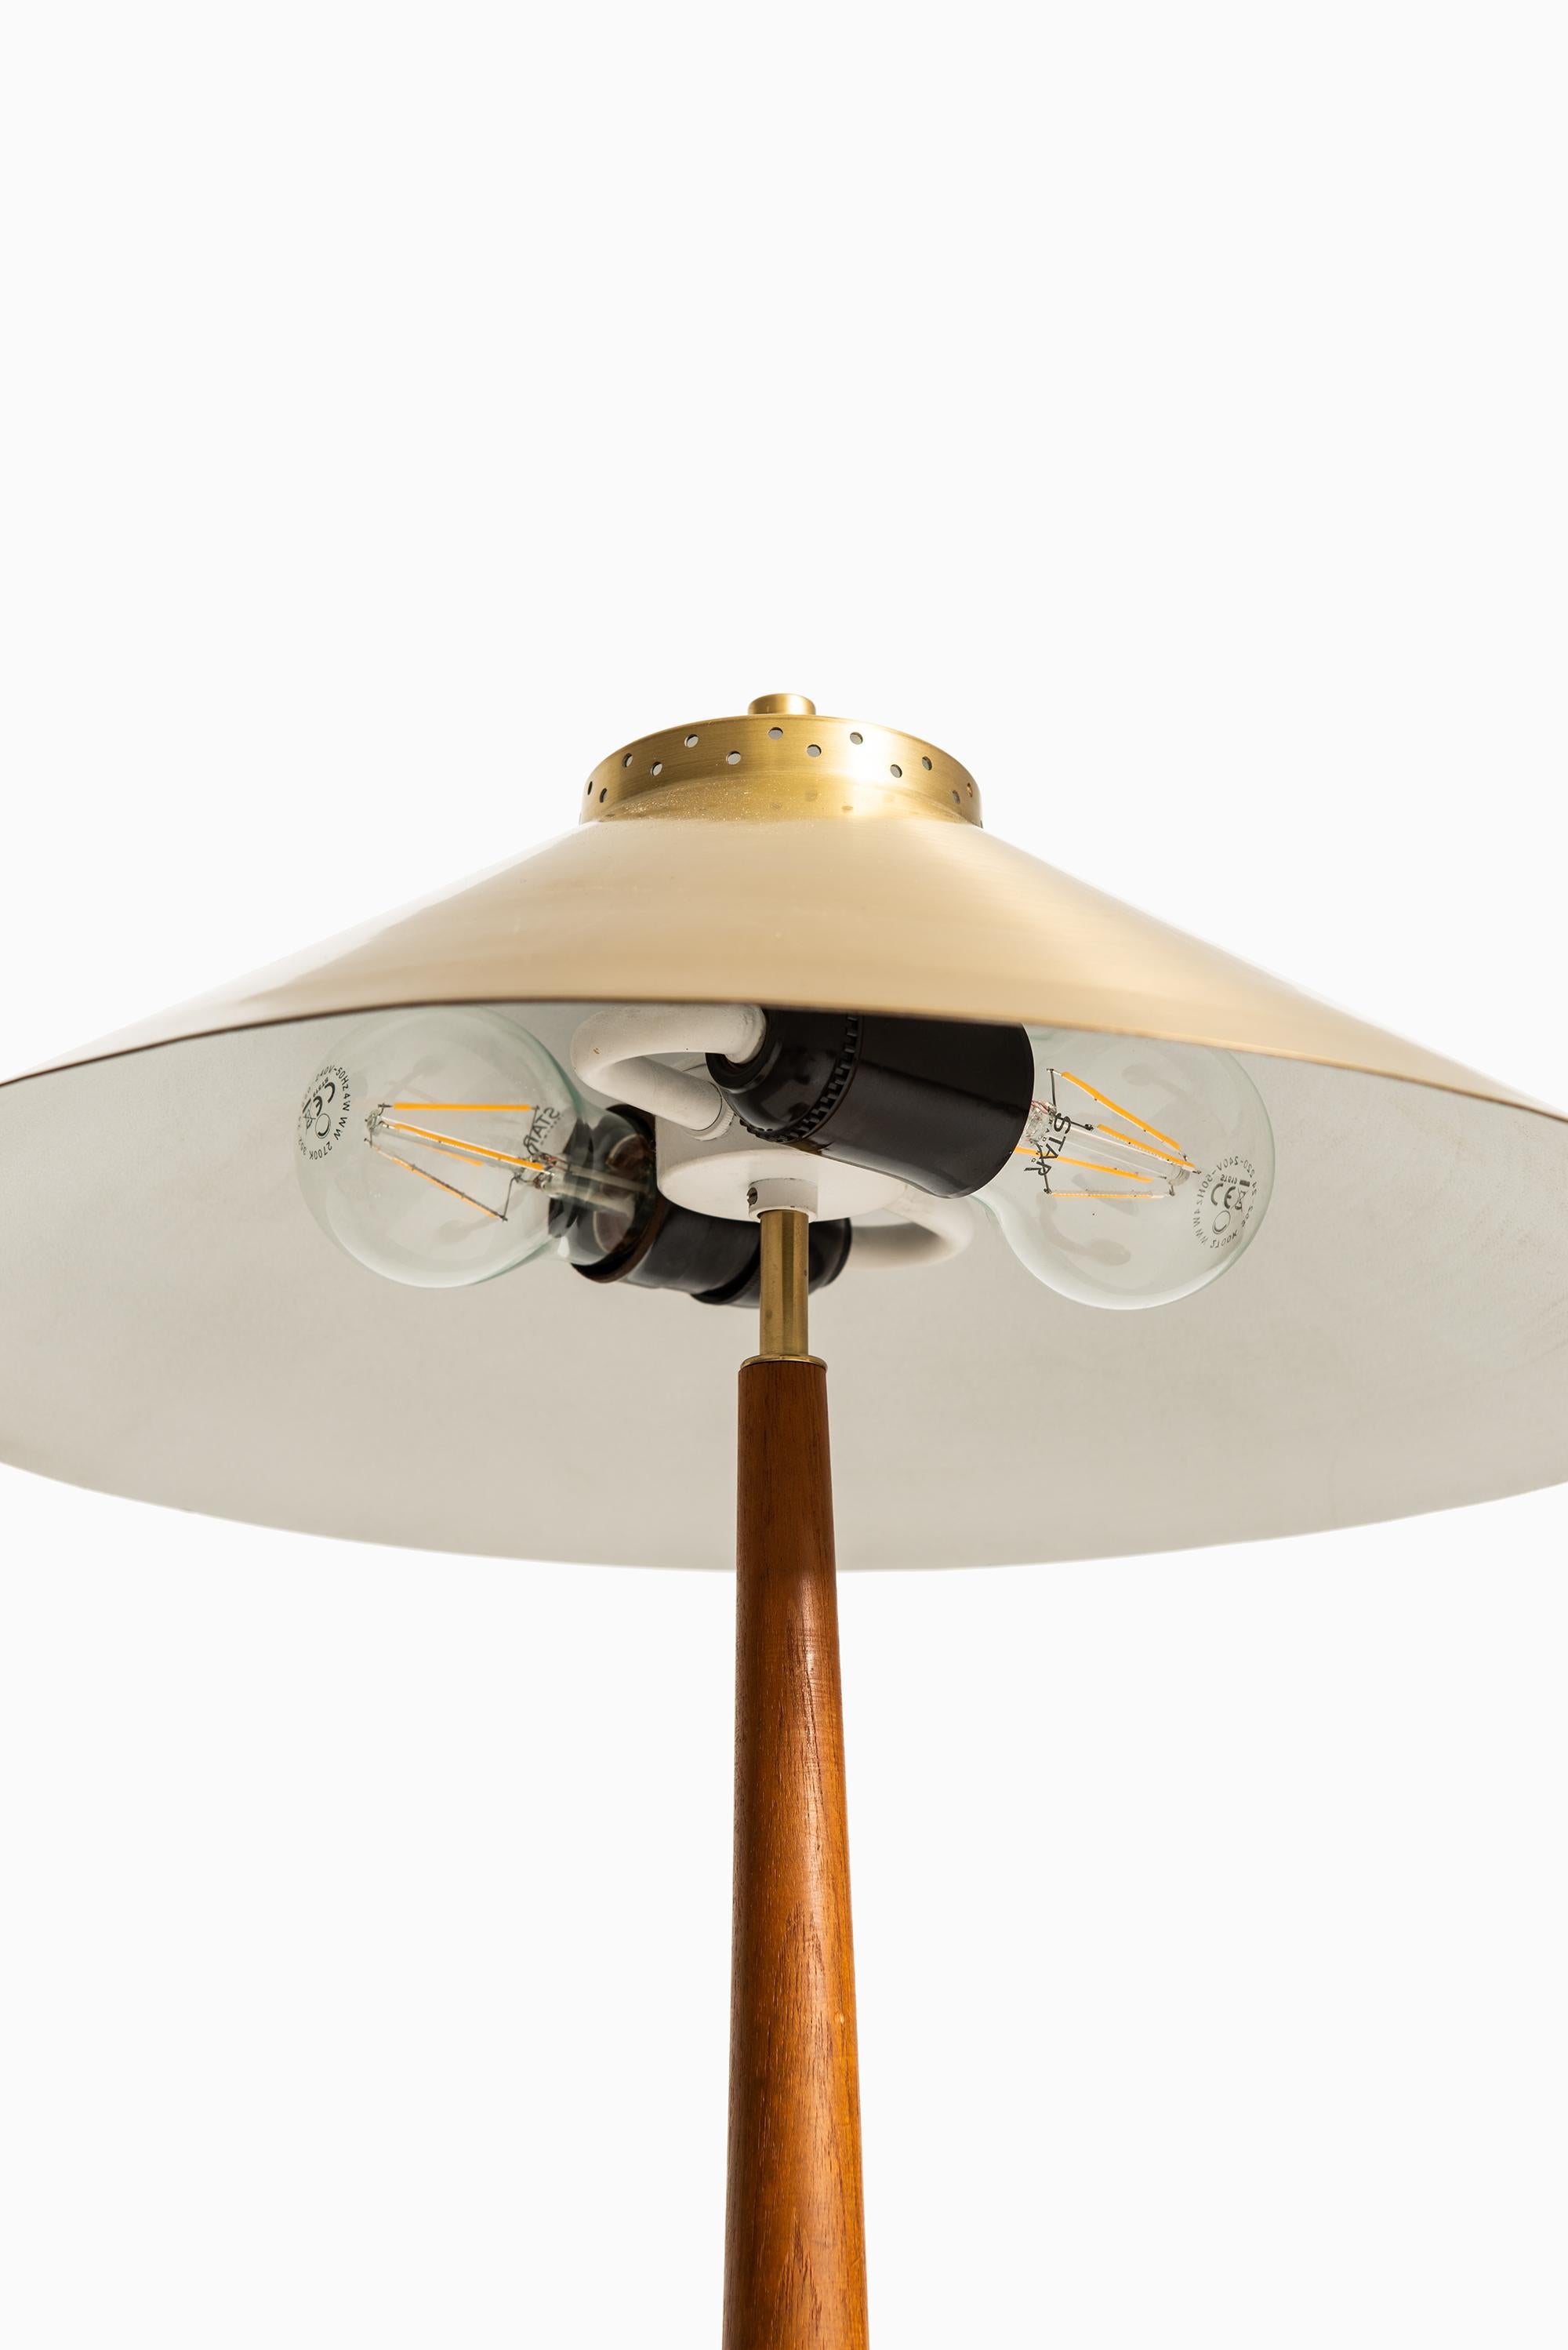 Rare table lamp by unknown designer. Produced by Boréns in Sweden.